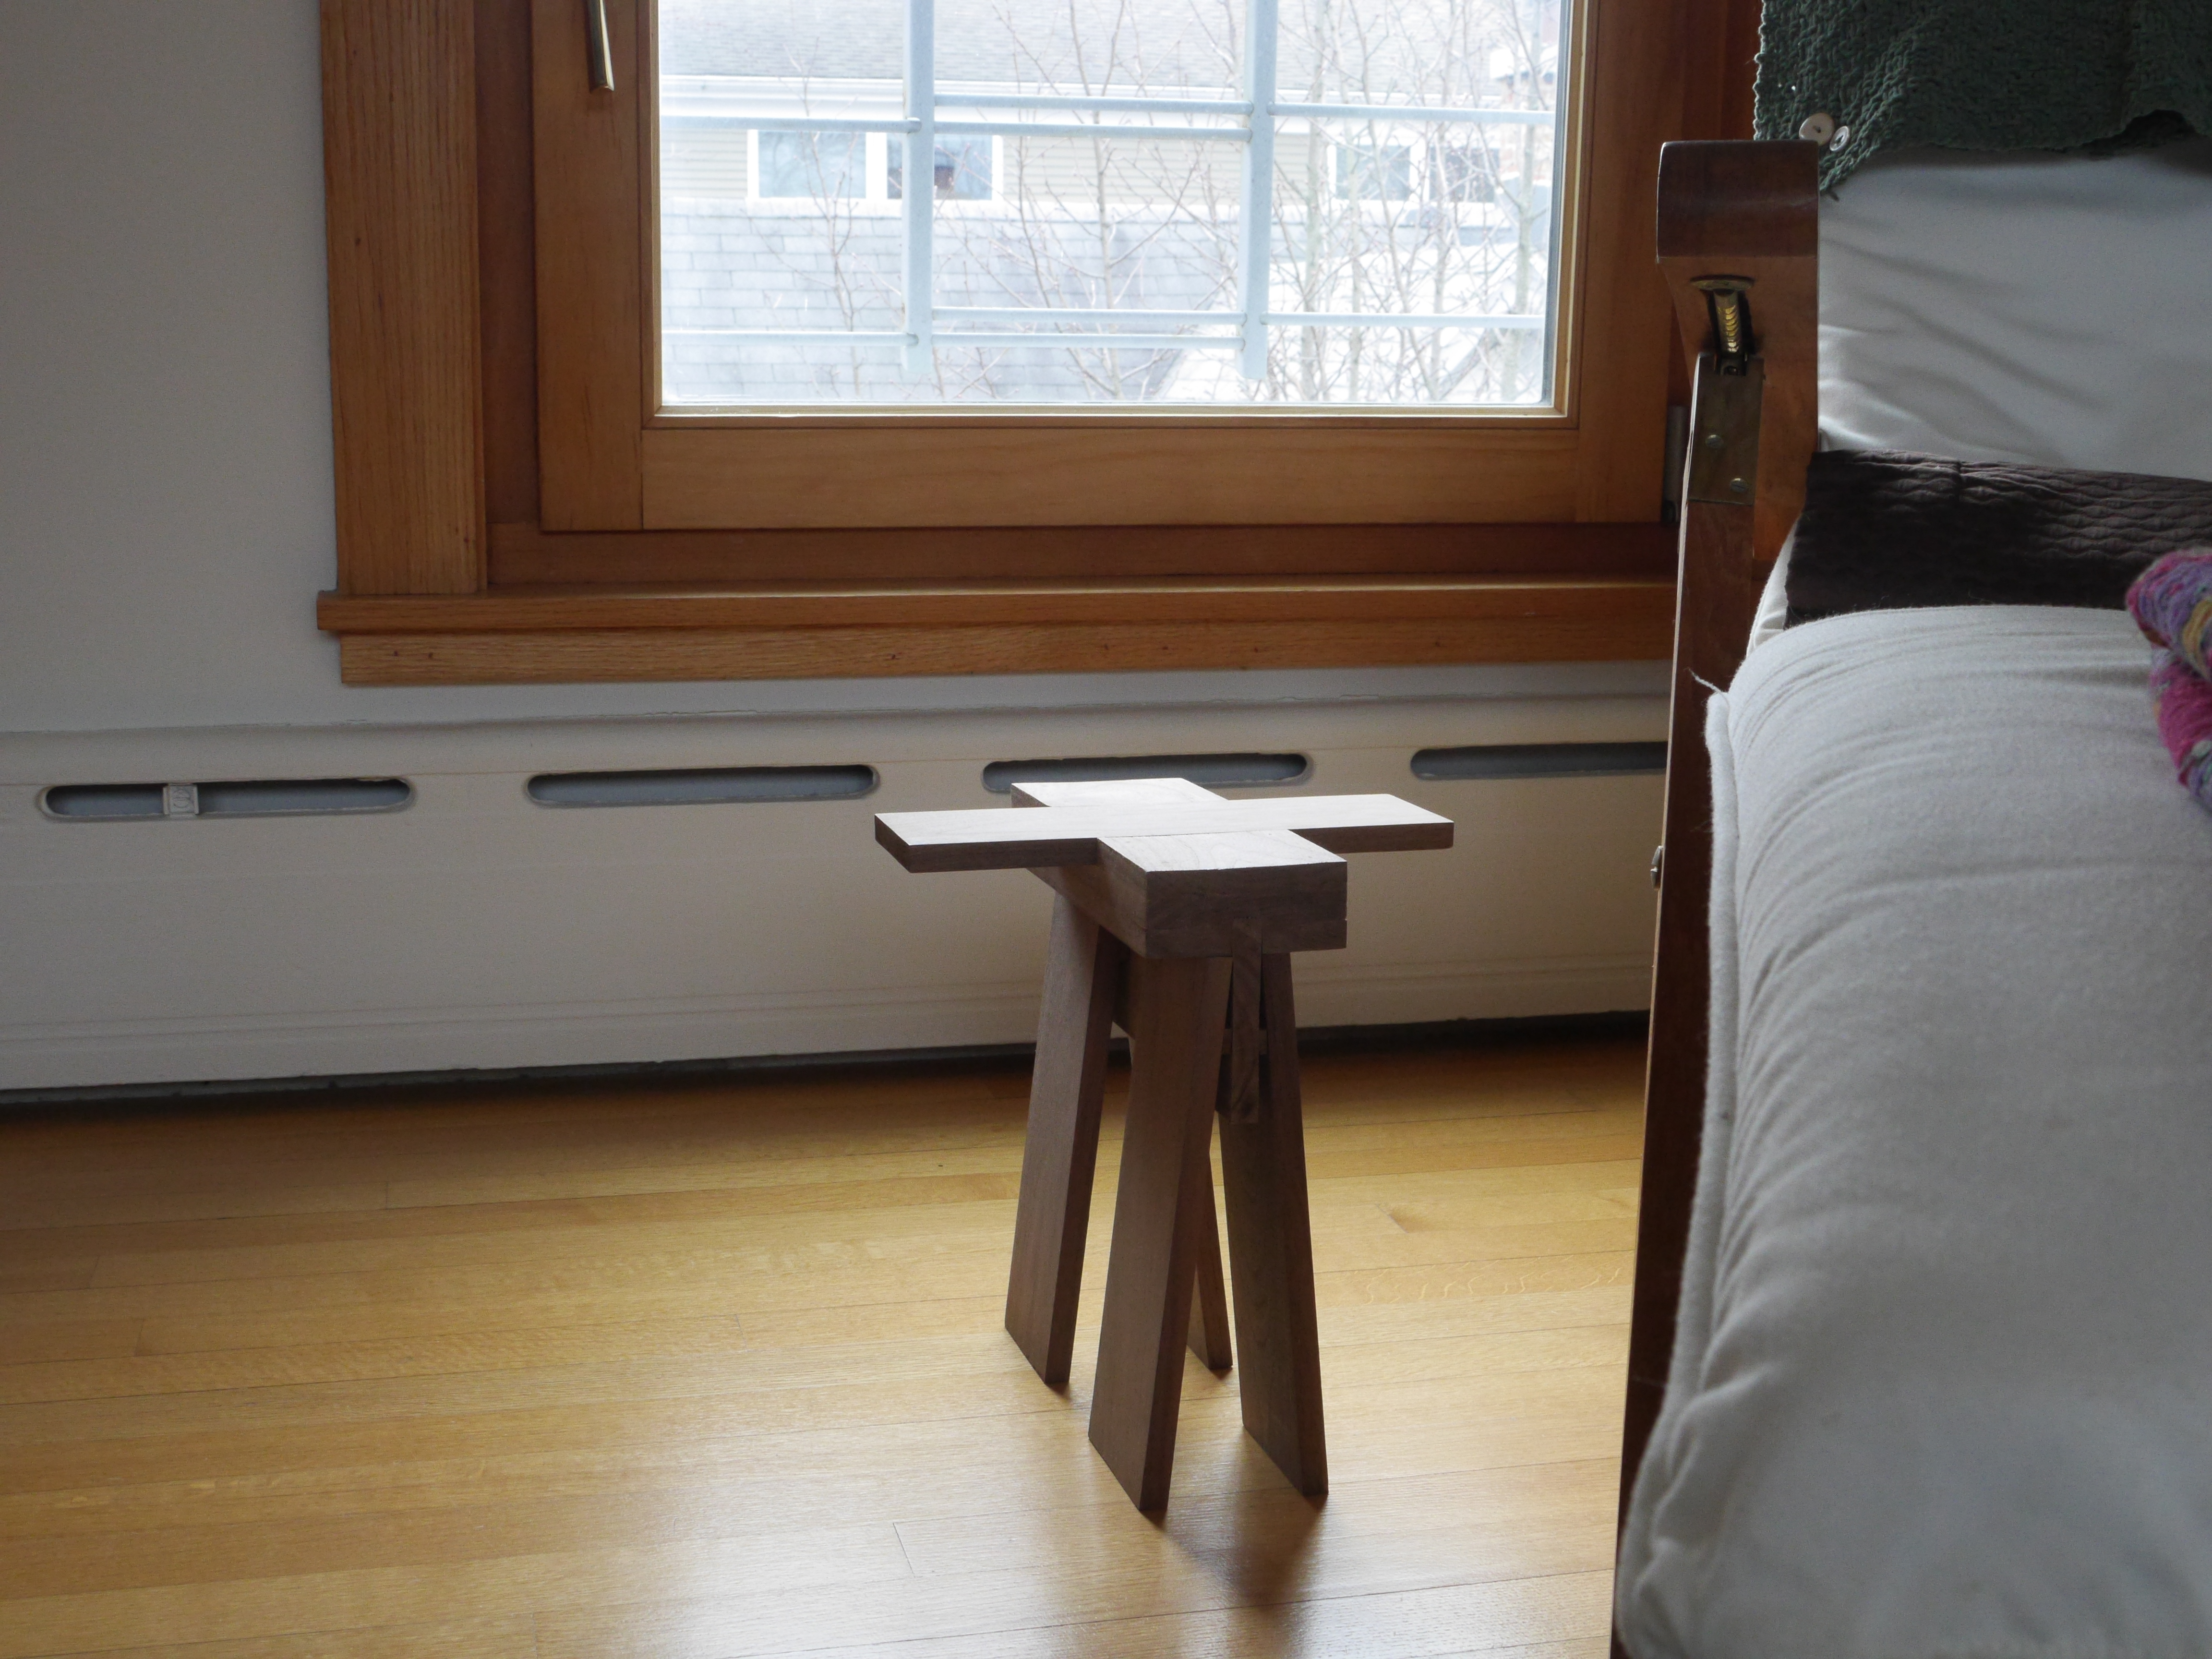 a wooden stool sits next to a lounge chair on a hardwood floor, and in the background is a window with wooden frame